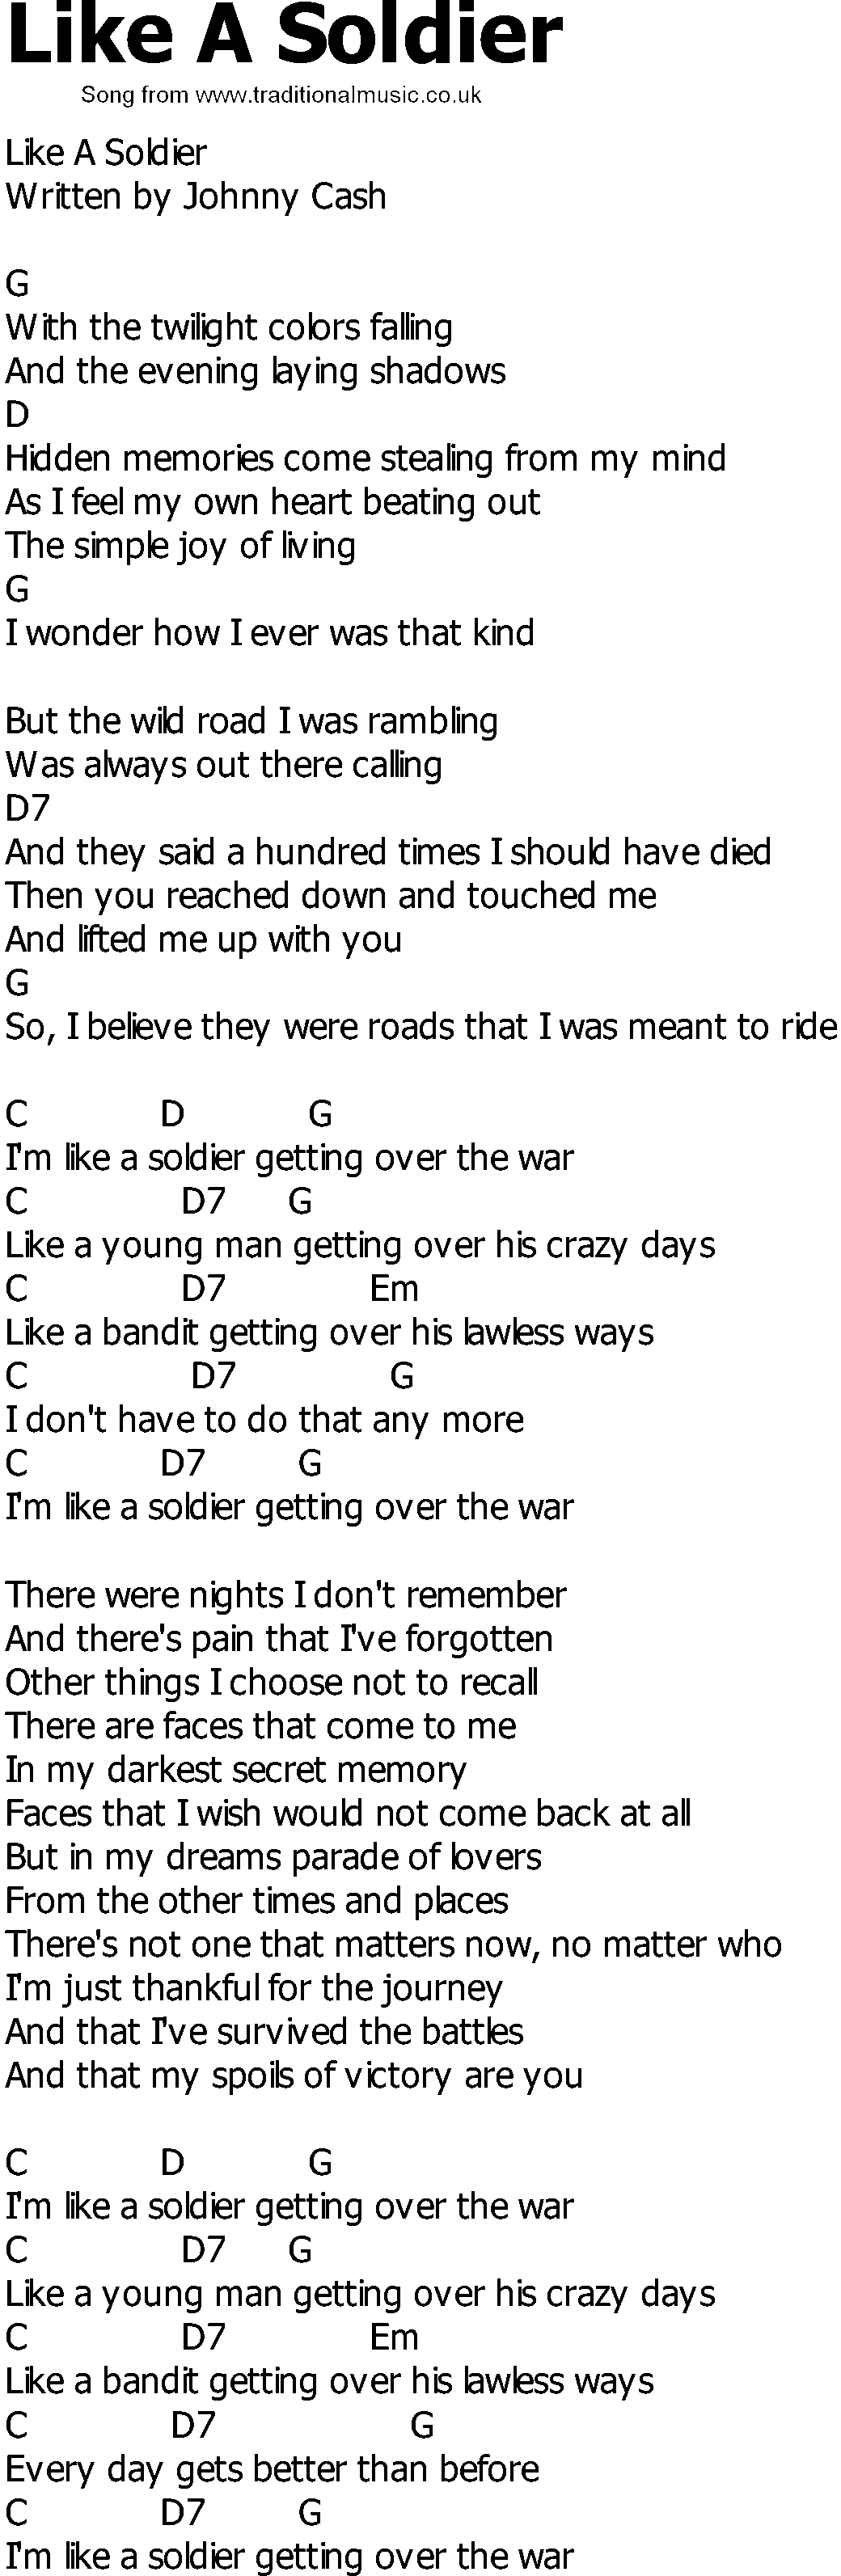 Old Country song lyrics with chords - Like A Soldier